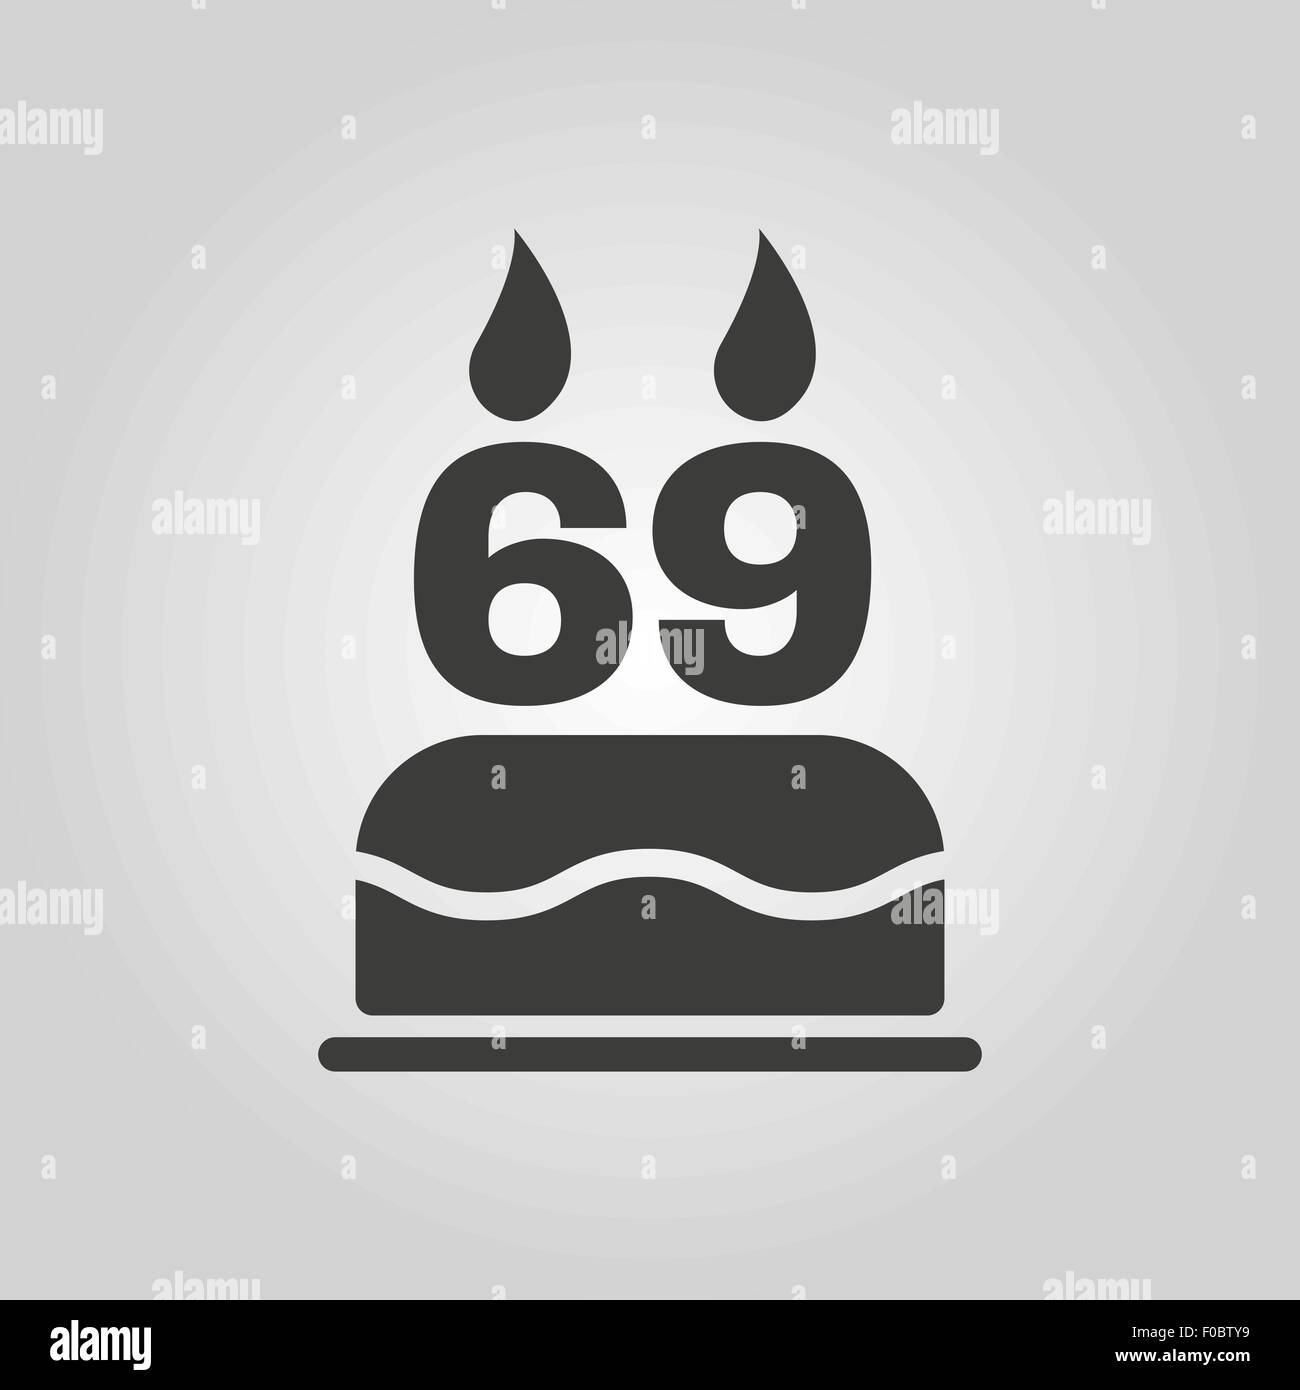 The birthday cake with candles in the form of number 69 icon. Birthday symbol. Flat Stock Vector